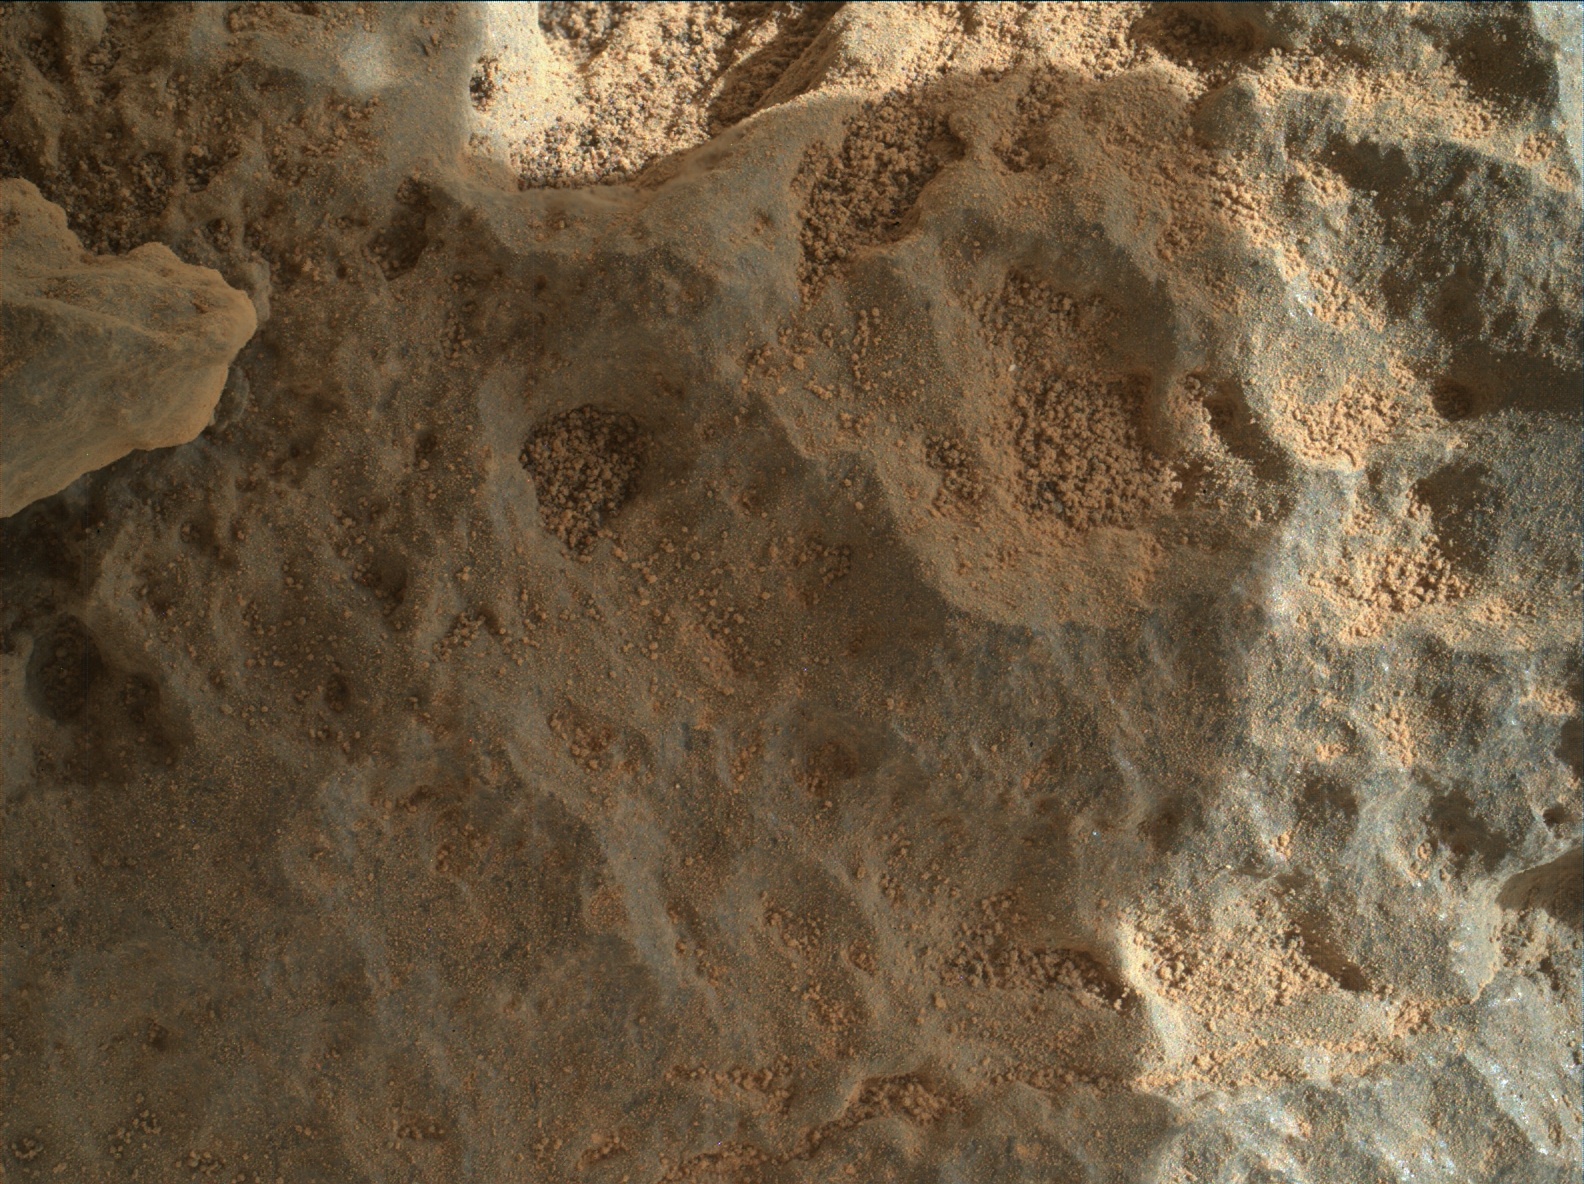 Nasa's Mars rover Curiosity acquired this image using its Mars Hand Lens Imager (MAHLI) on Sol 1408